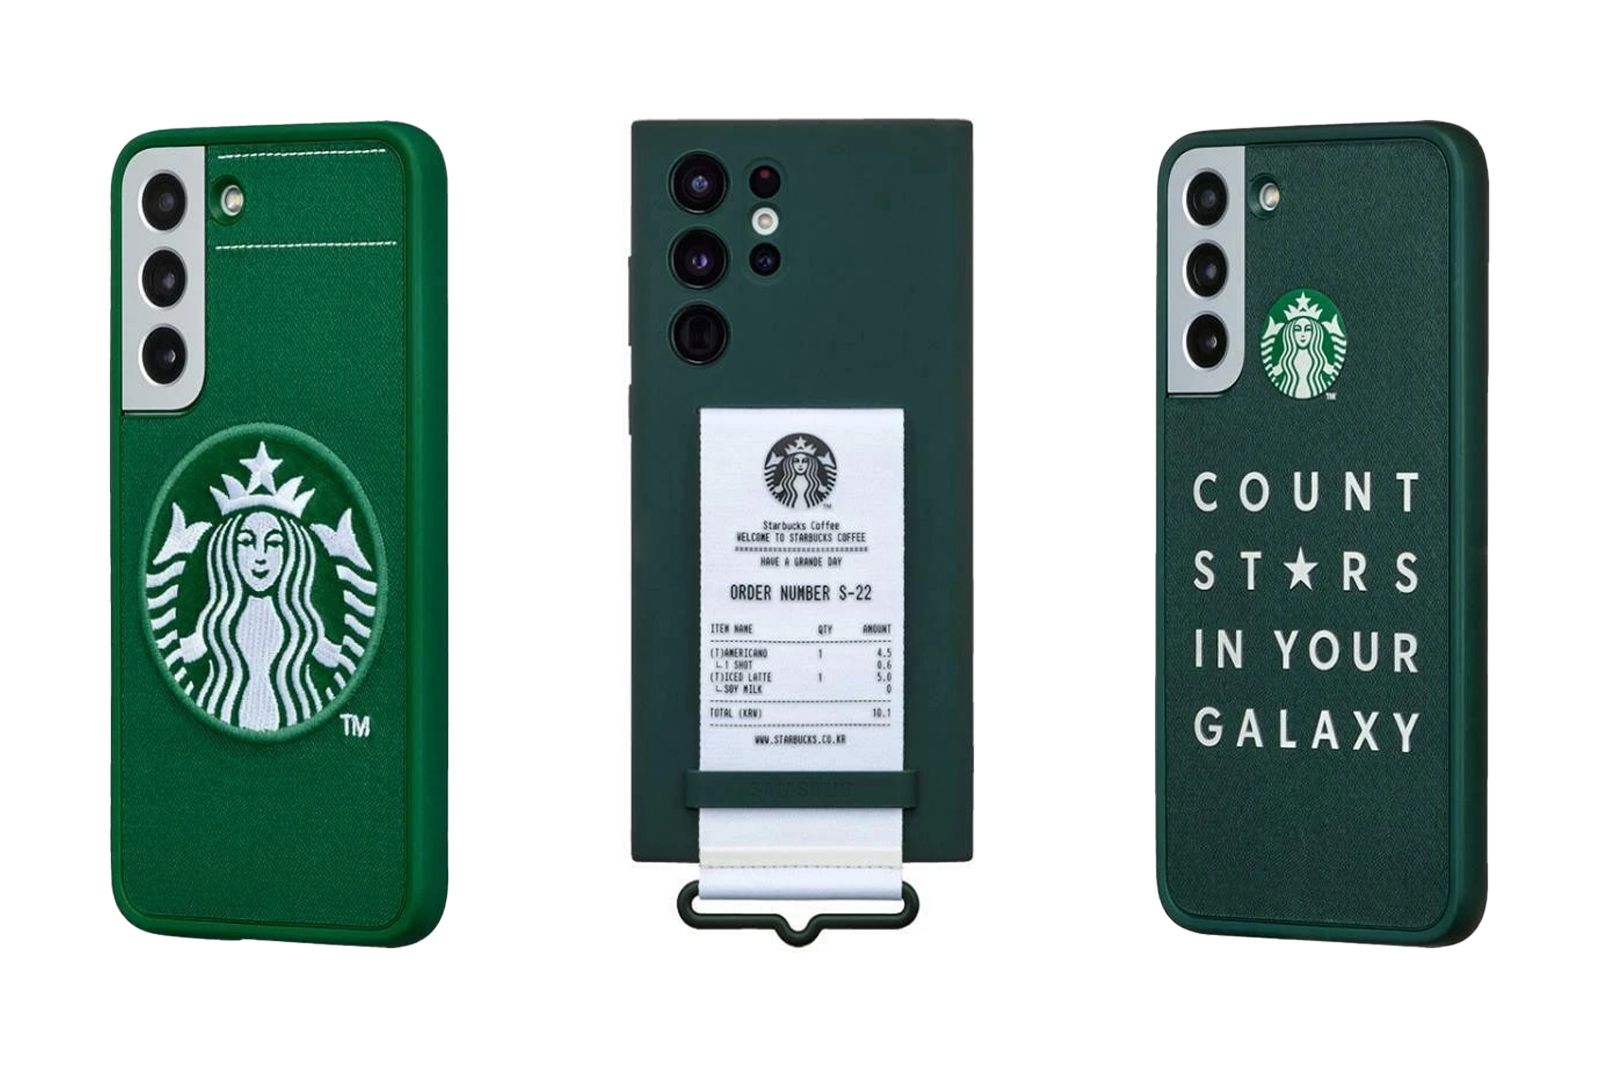 Starbucks x Samsung collab results in great Galaxy Buds 2 case photo 1